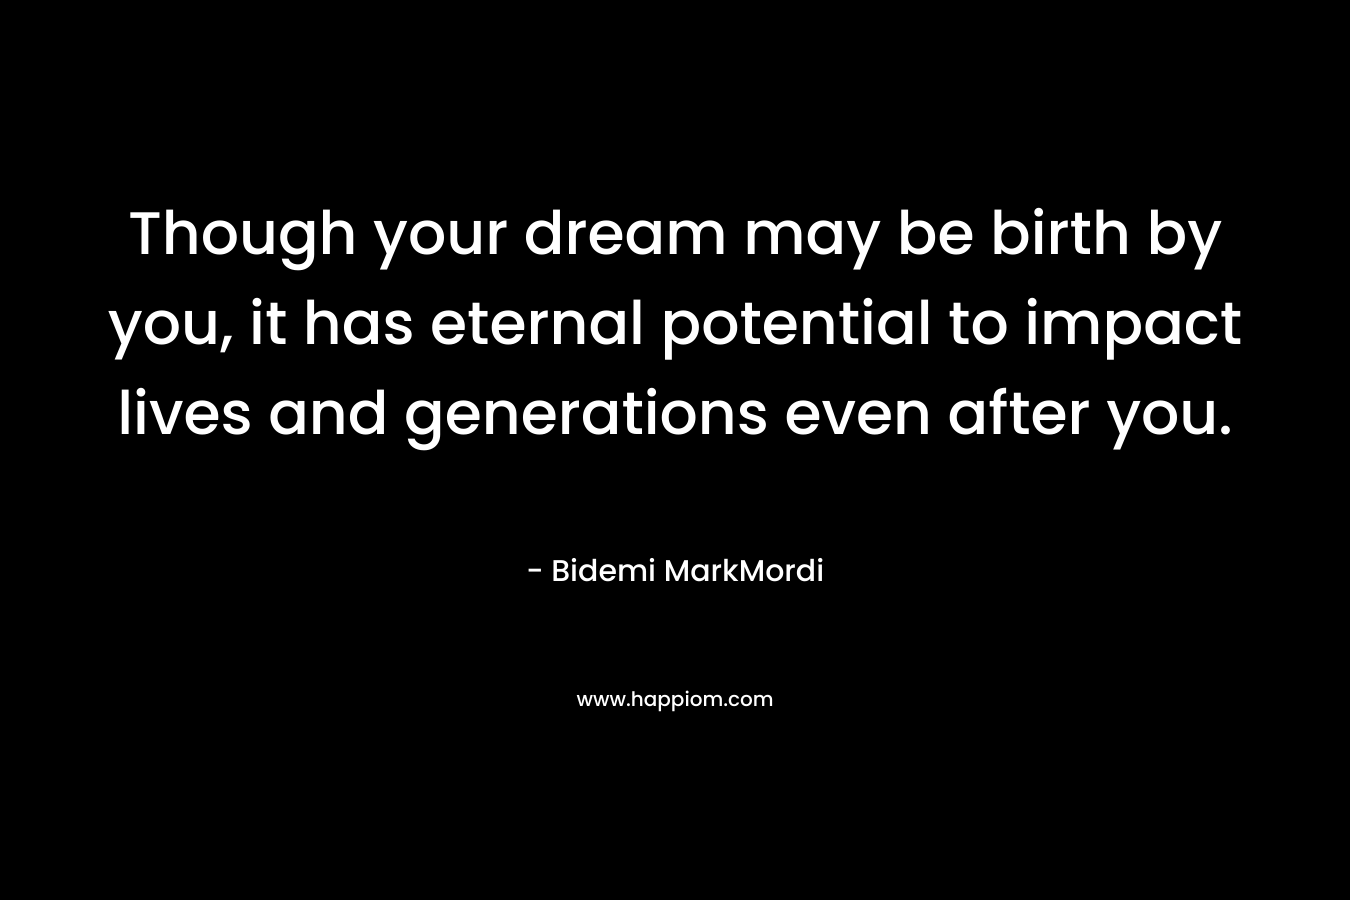 Though your dream may be birth by you, it has eternal potential to impact lives and generations even after you.